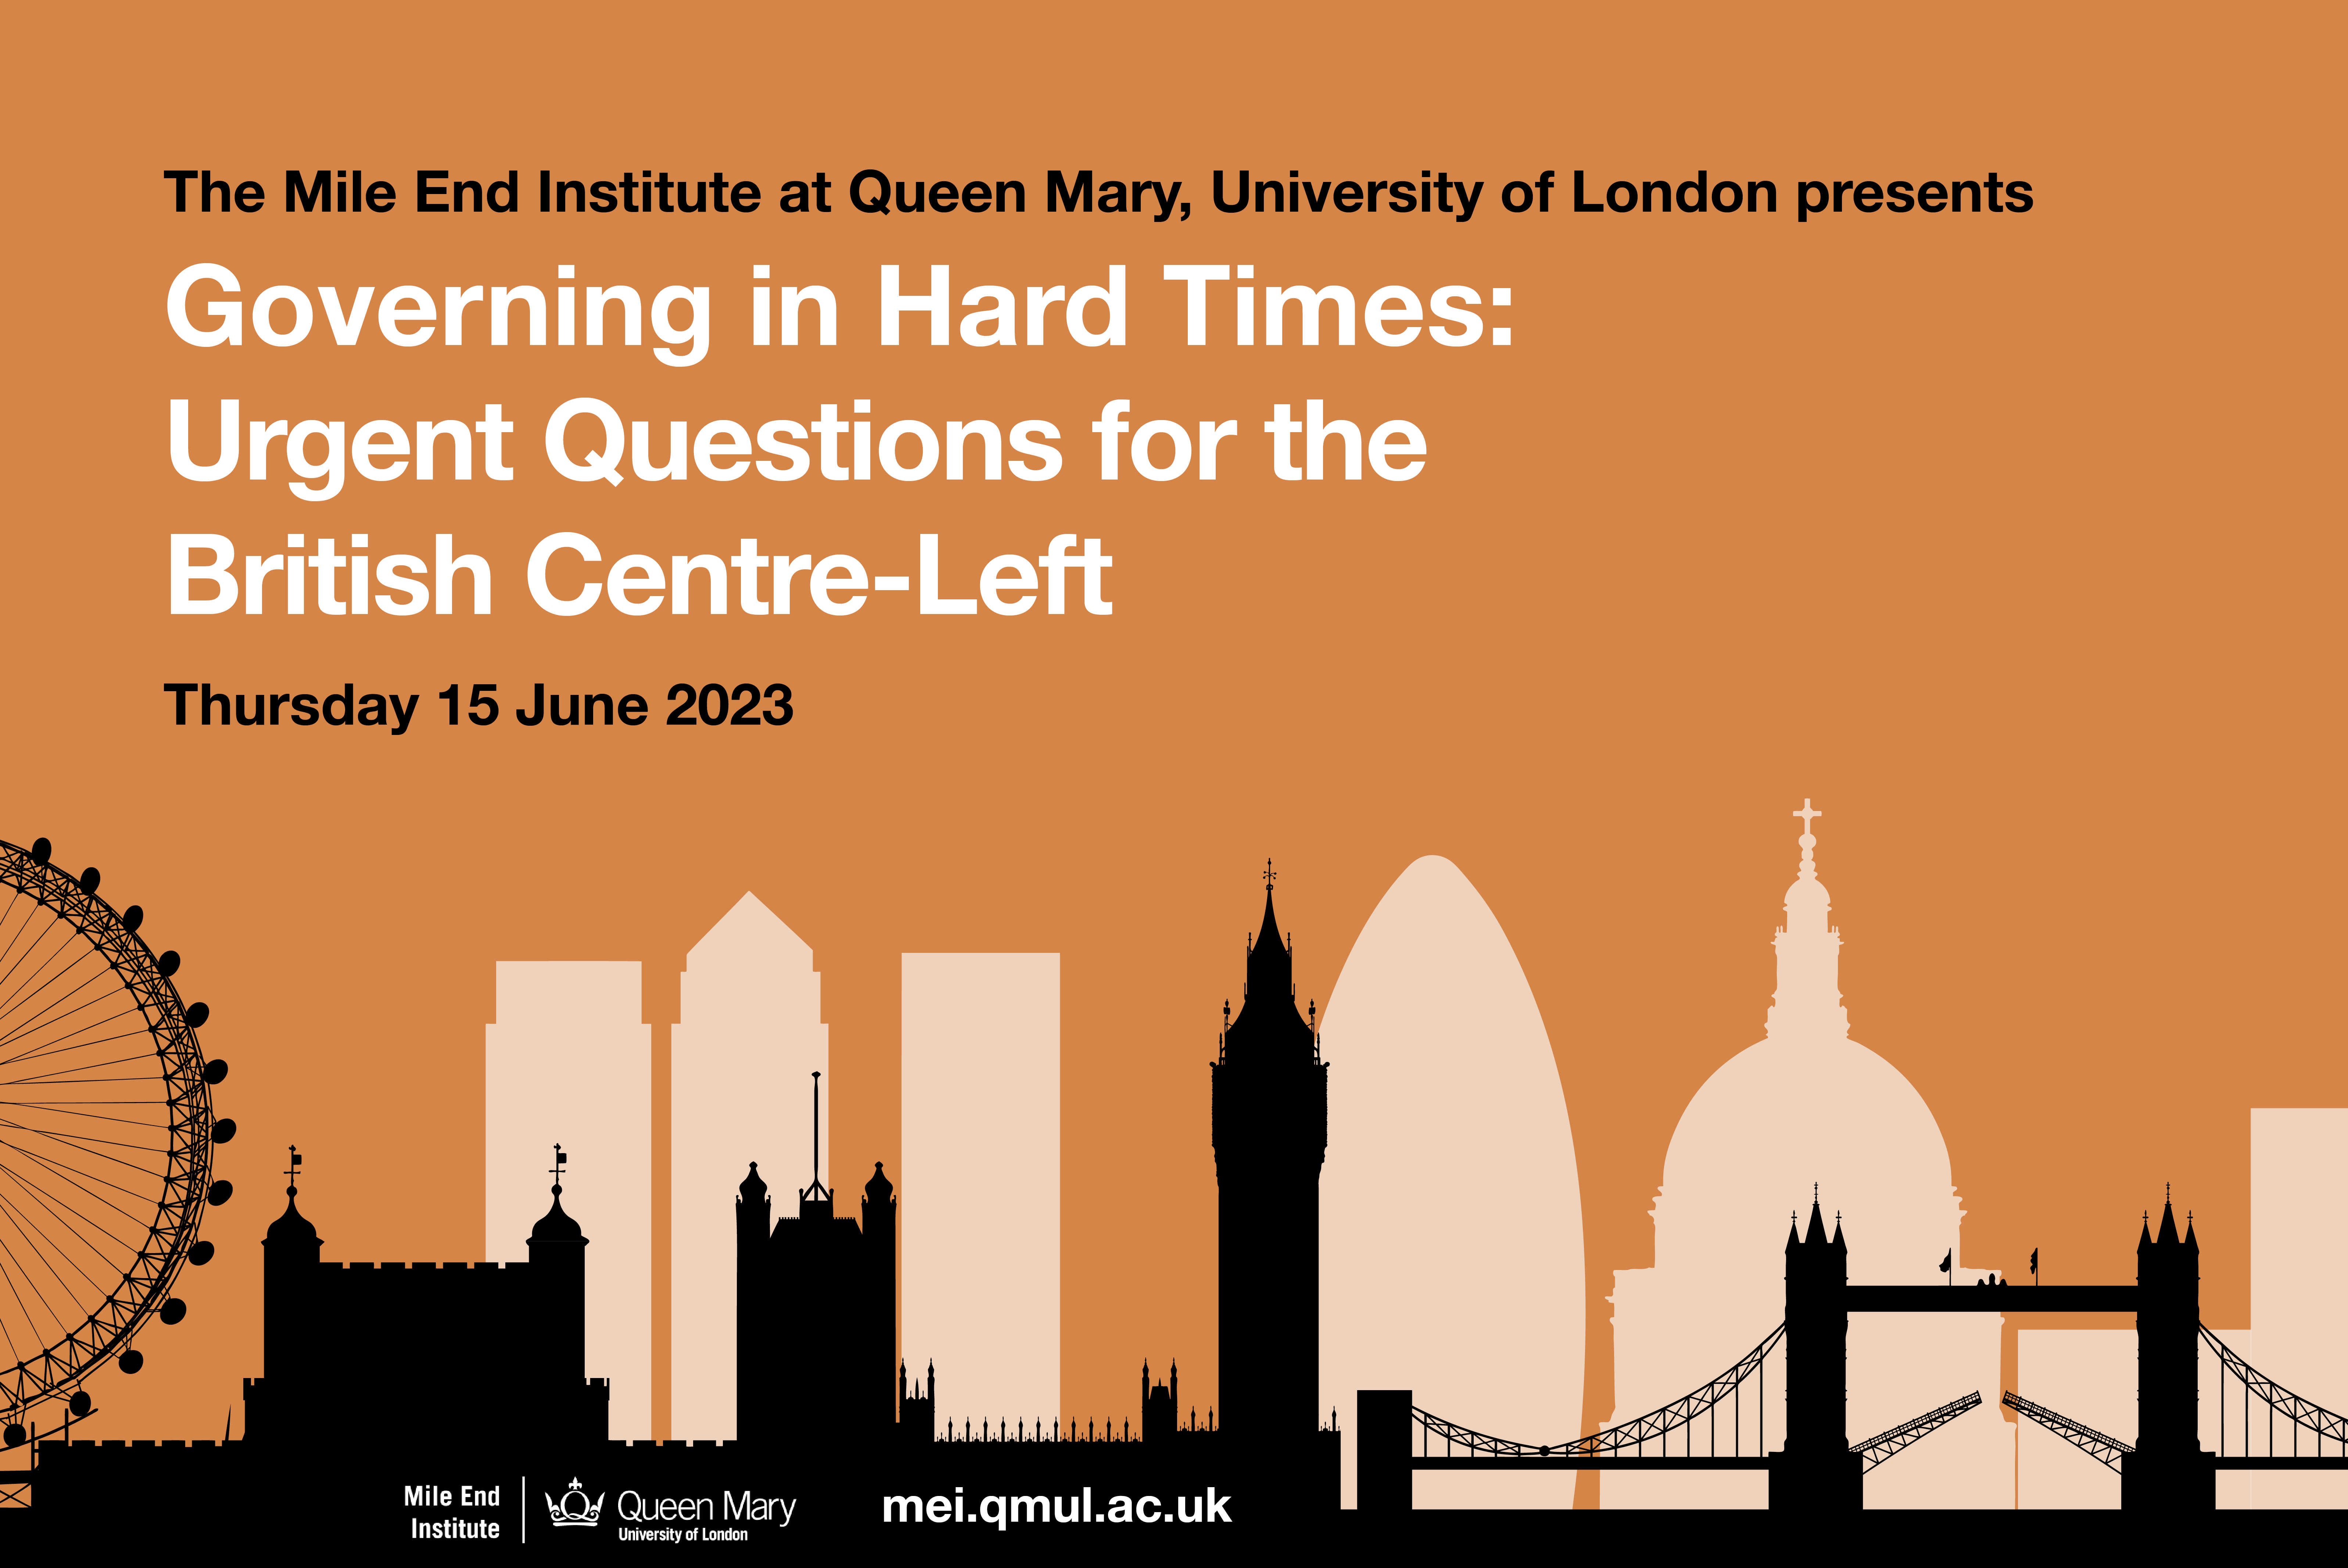 Promotional Image for the MEI's conference on the urgent questions facing the British centre-left. It shows the title of the conference against an orange background above a silhouette of the London skyline.